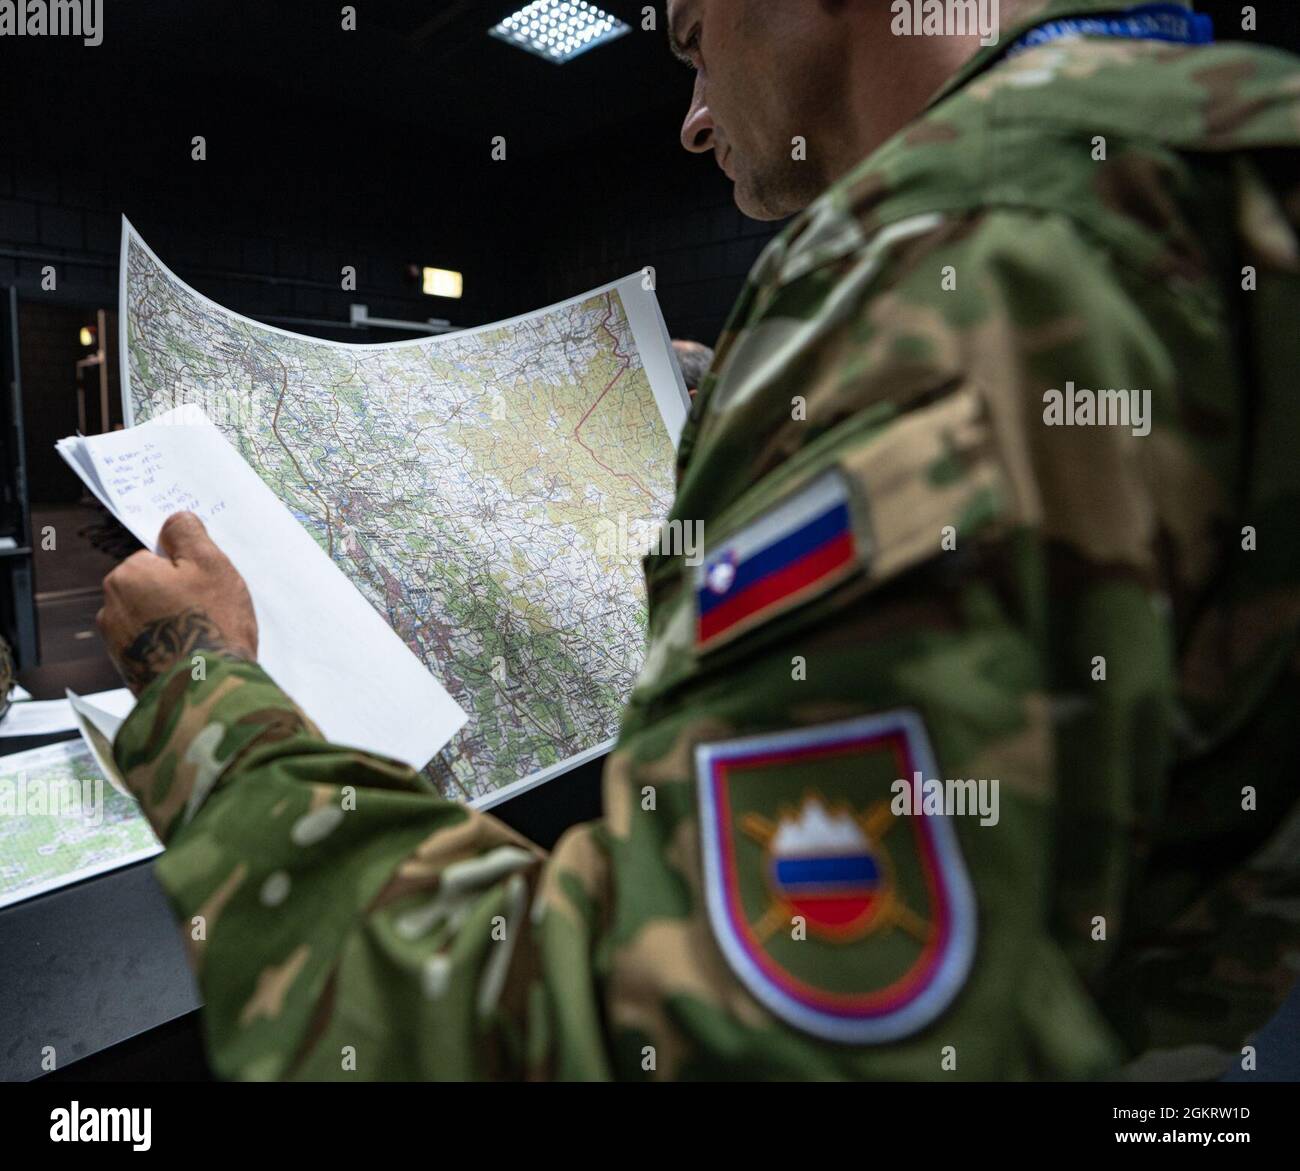 Sergeant 1st Class Almir Mujcinovic, a Joint Terminal Attack Controller with the Slovenian Army’s 152nd Fixed Wing Squadron, reviews scenario maps while attending a JTAC workshop at the U.S. Air Forces in Europe and Air Forces Africa’s Warfare Center on Einsiedlerhof Air Station, Germany, June 23, 2021. Mujcinovic is providing feedback on behalf of the Slovenian Army to the 4th Combat Control Squadron as they develop a multinational JTAC program focused on developing the readiness of the joint warfighter. Stock Photo